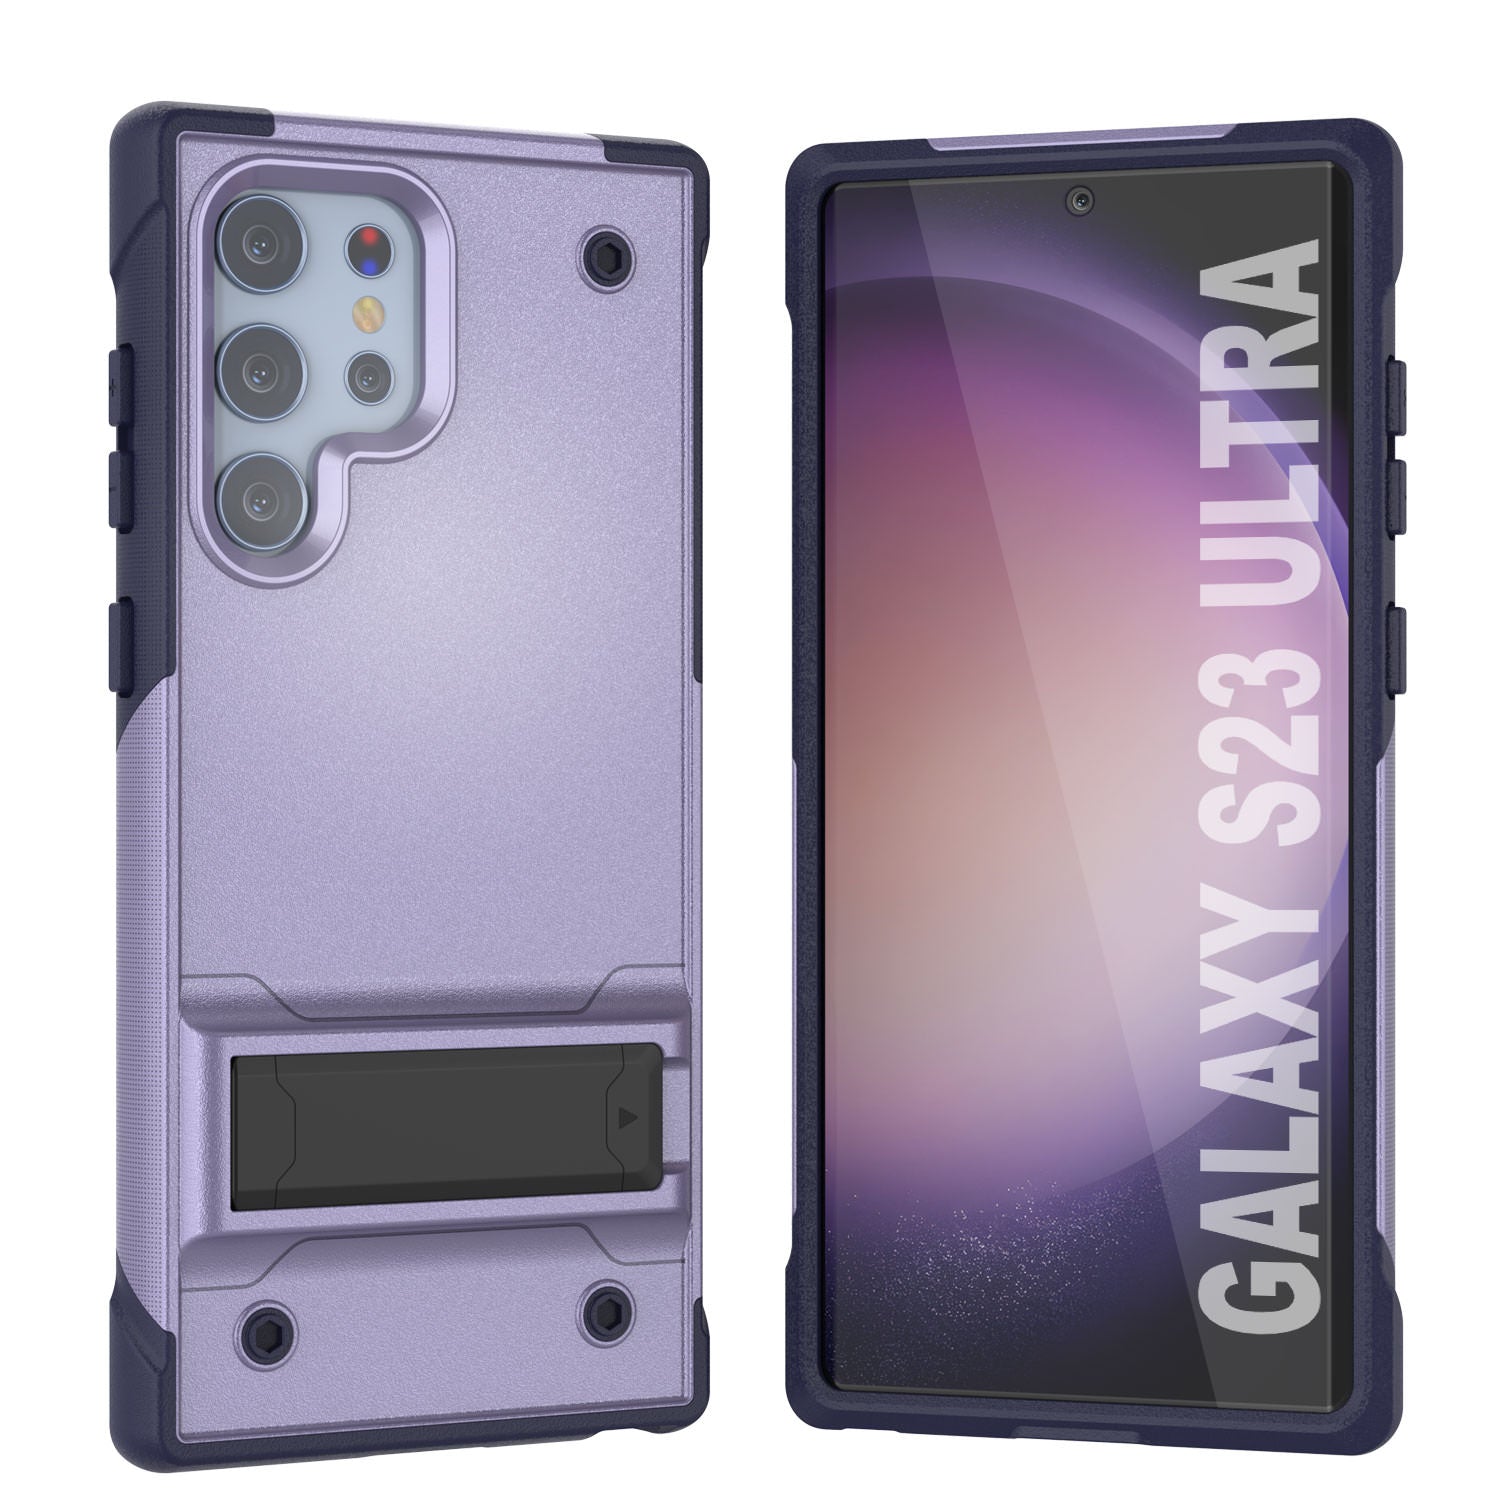 Punkcase Galaxy S23 Ultra Case [Reliance Series] Protective Hybrid Military Grade Cover W/Built-in Kickstand [Purple-Navy]